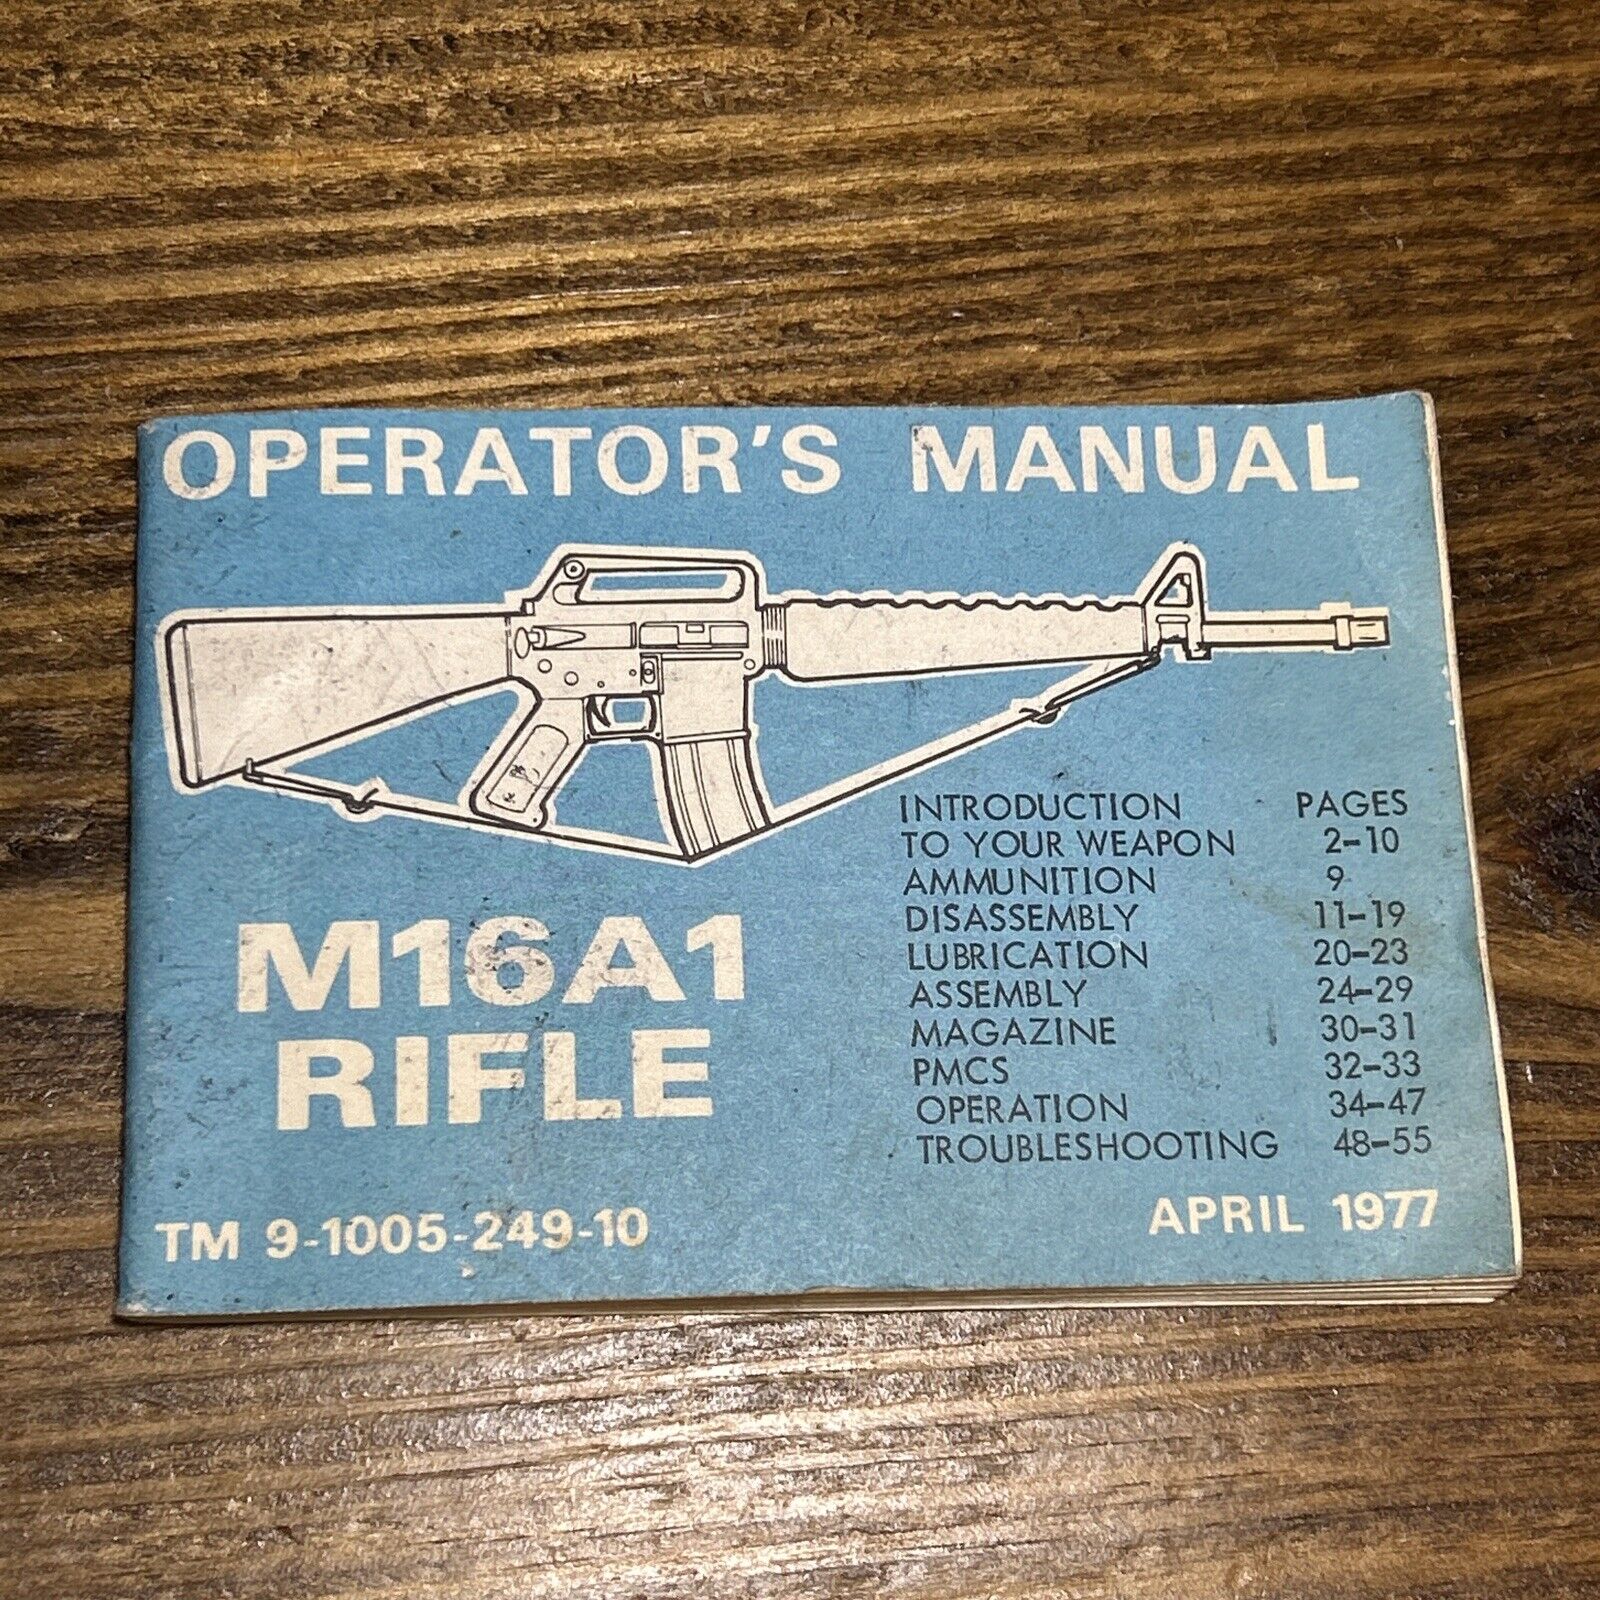 Vintage M16A1 Rifle Operator\'s Manual Guide Book April 1977 Army 9-1005-249-10